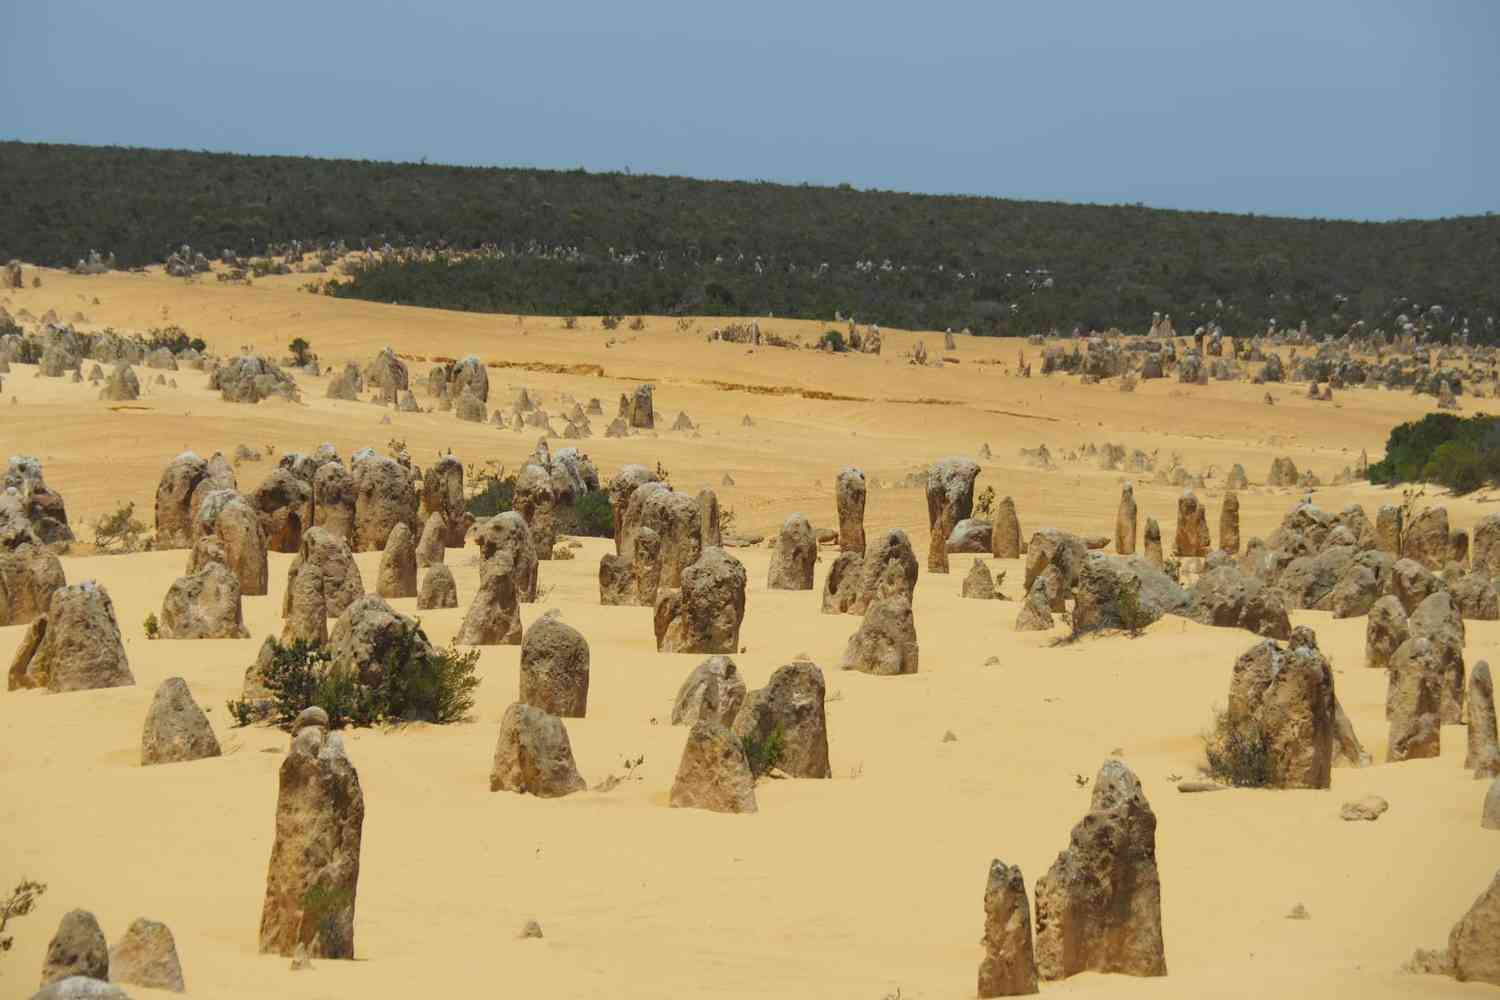 Image captures a wide landscape of the Pinnacles near Cervantes in Western Australia